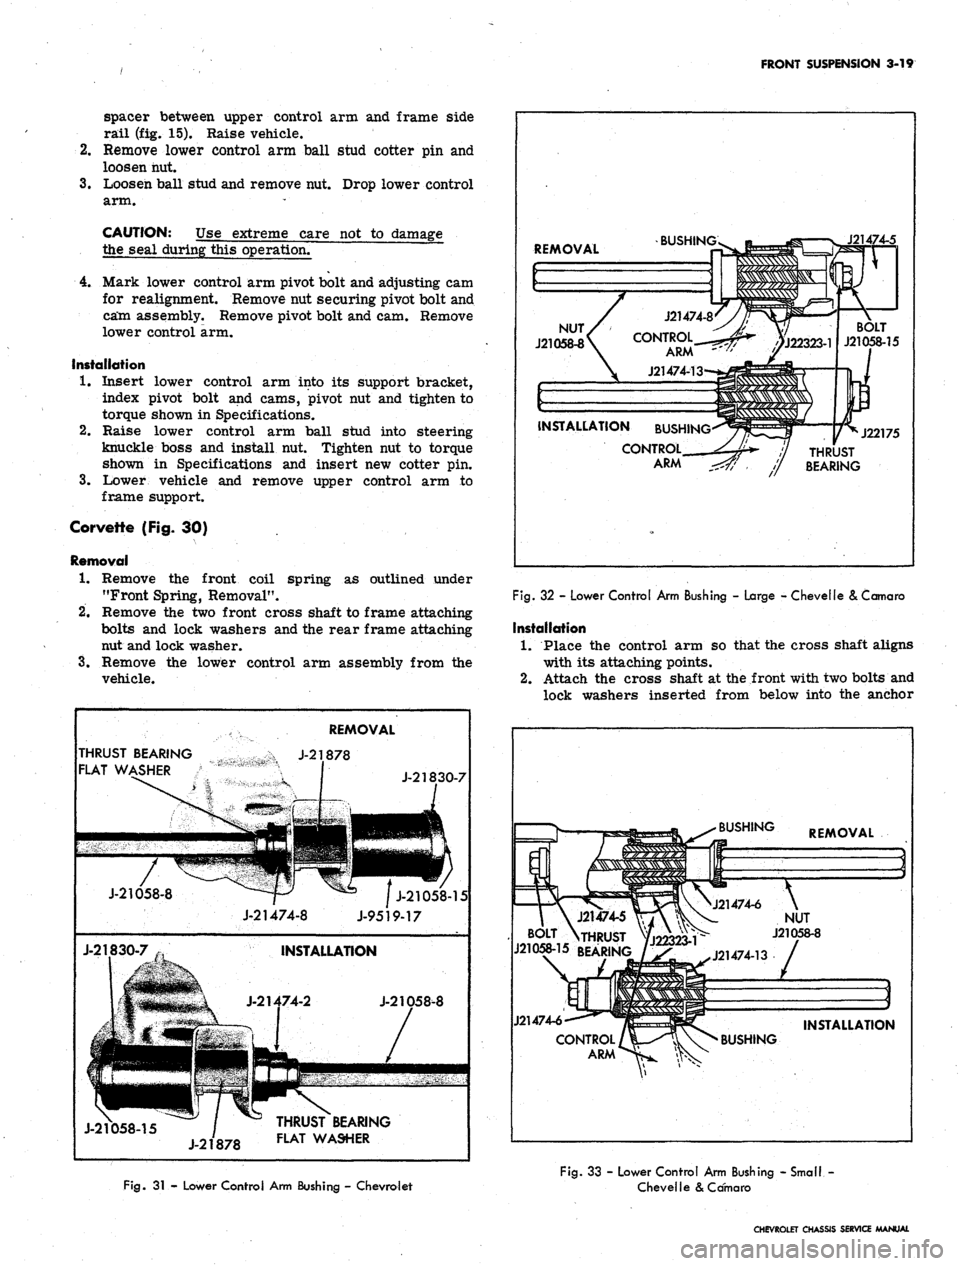 CHEVROLET CAMARO 1967 1.G Chassis Owners Manual 
FRONT
 SUSPENSION 3-19

spacer between upper control arm and frame side

rail (fig. 15). Raise vehicle.

2.
 Remove lower control arm ball stud cotter pin and

loosen hut.

3.
 Loosen ball stud and r